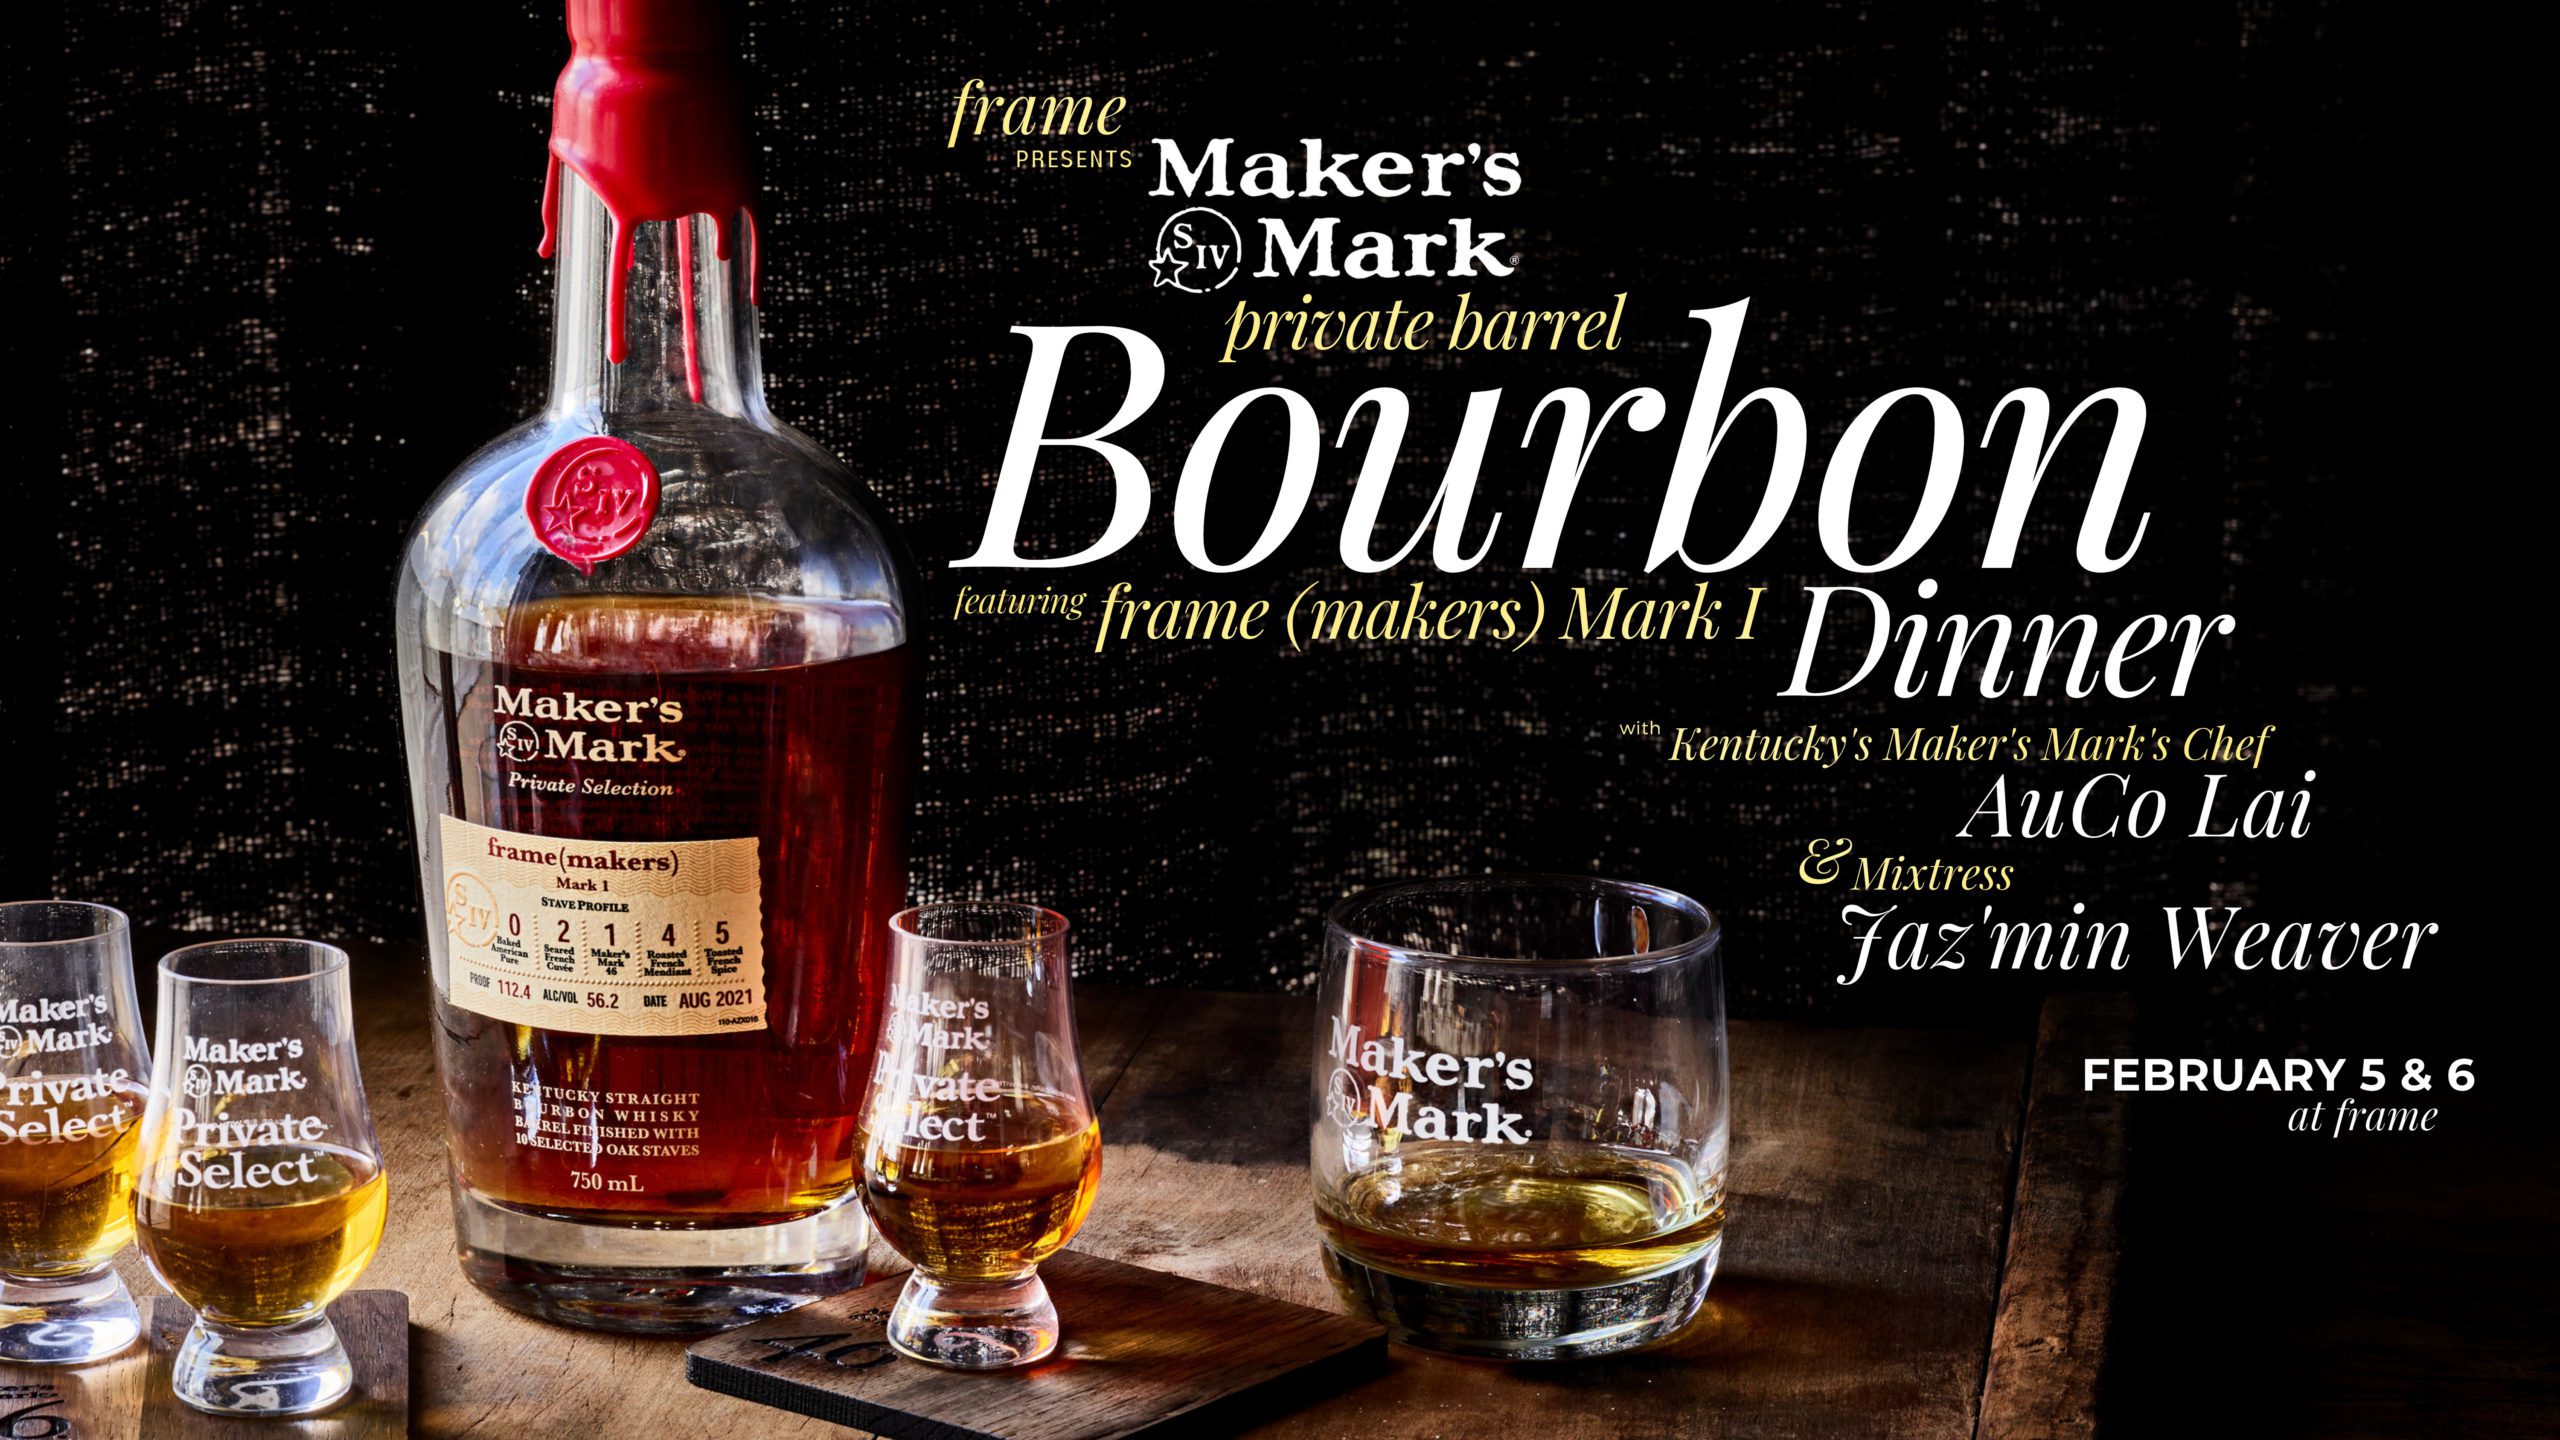 Makers Mark Private Barrel Bourbon Dinner with Chef AuCo Lai